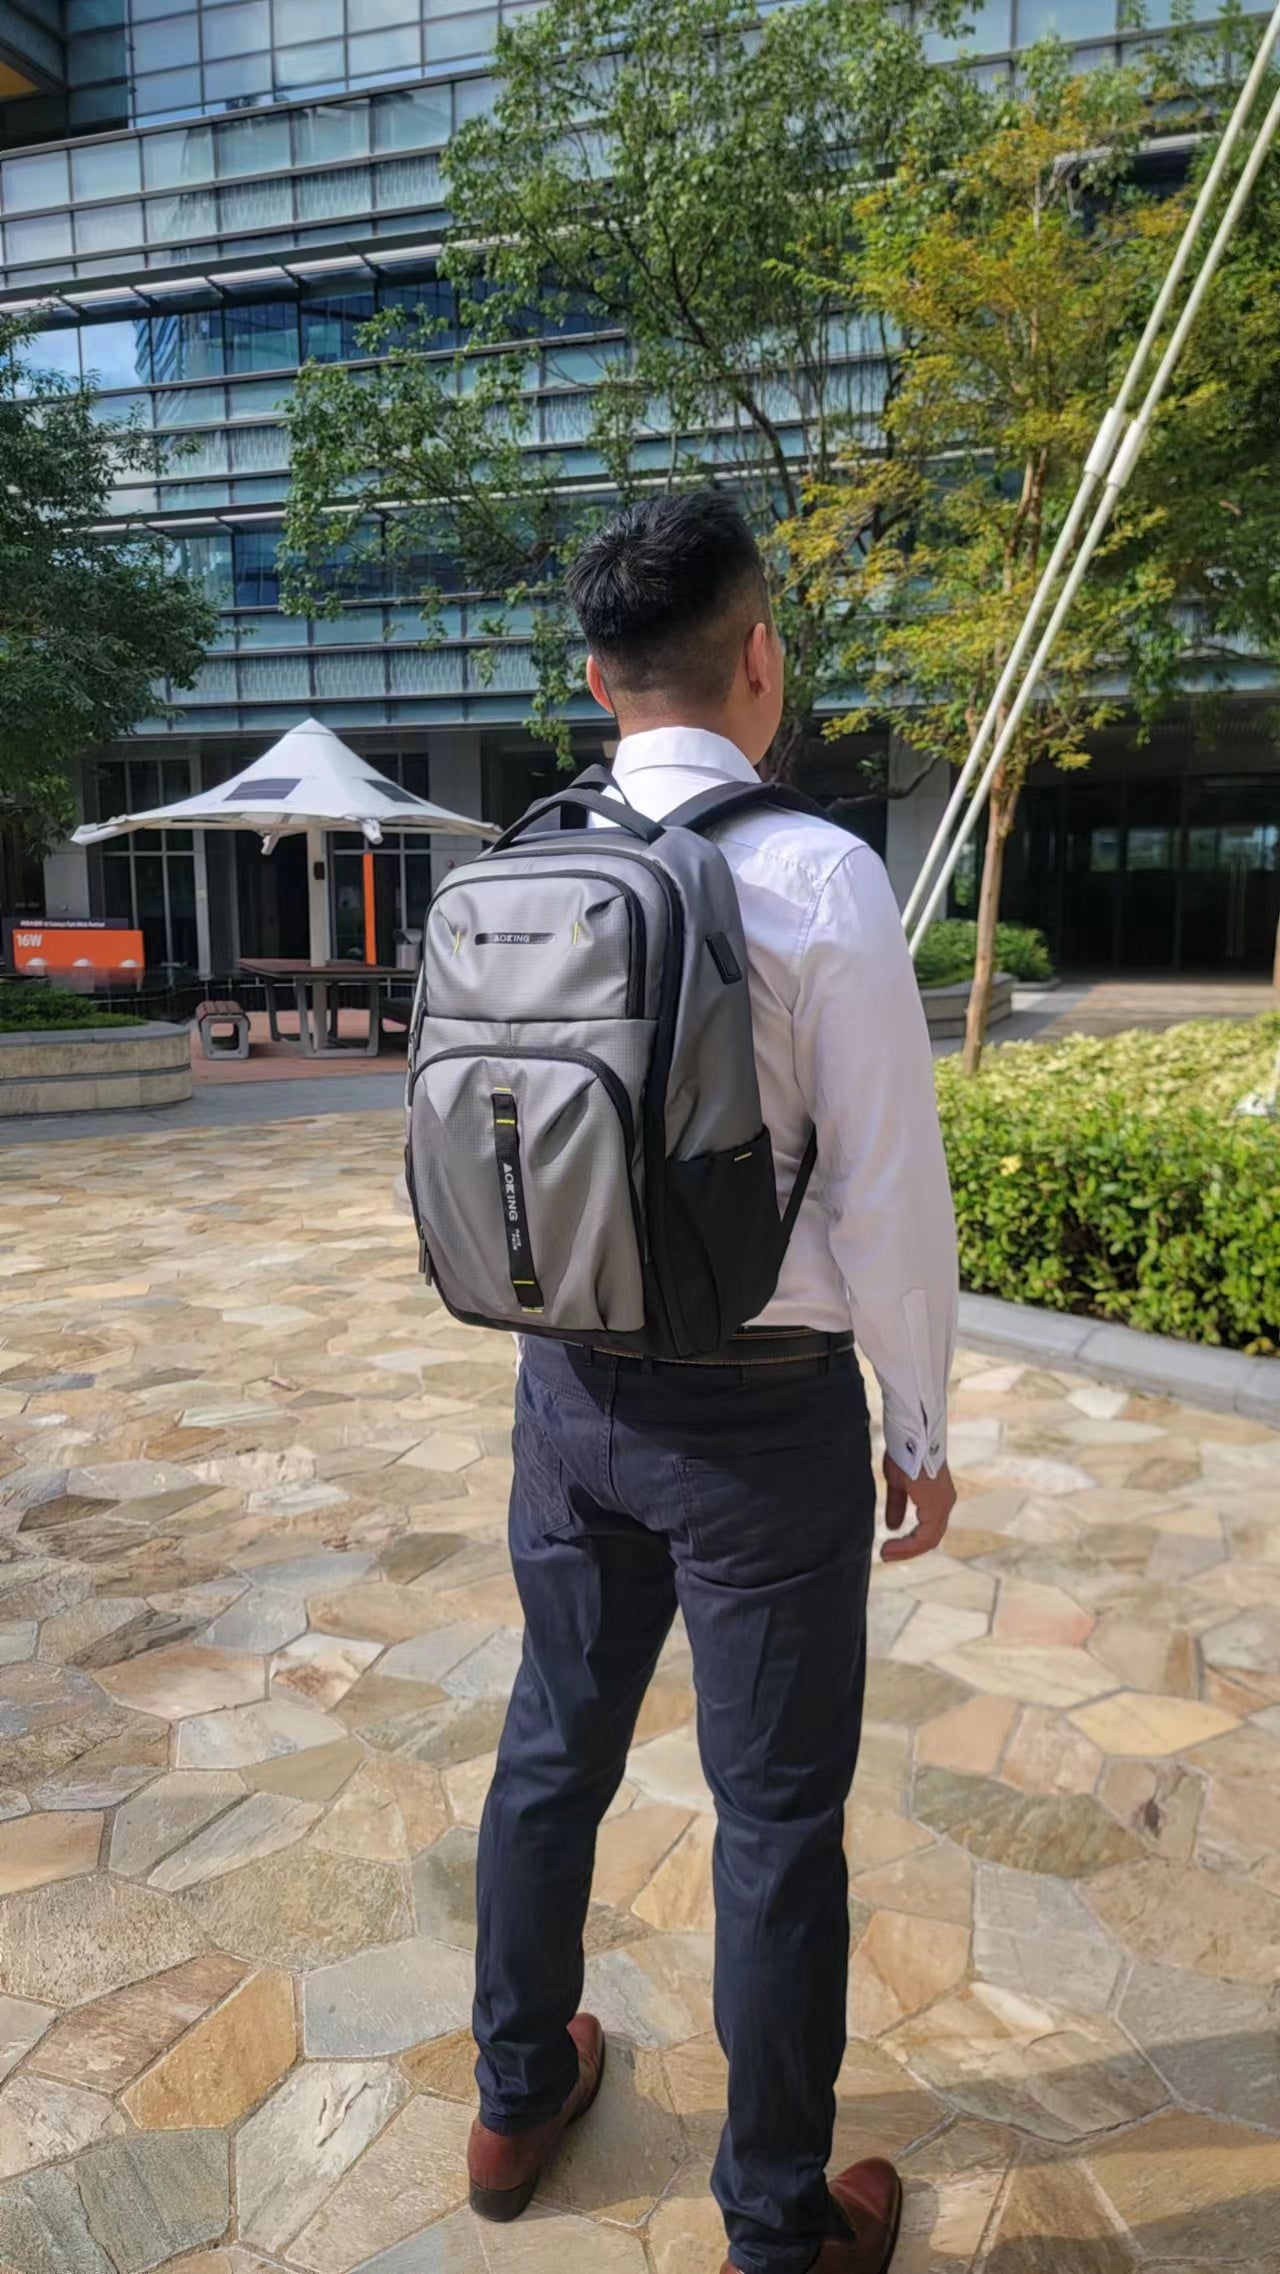 Travel business backpack SN2640 Silver